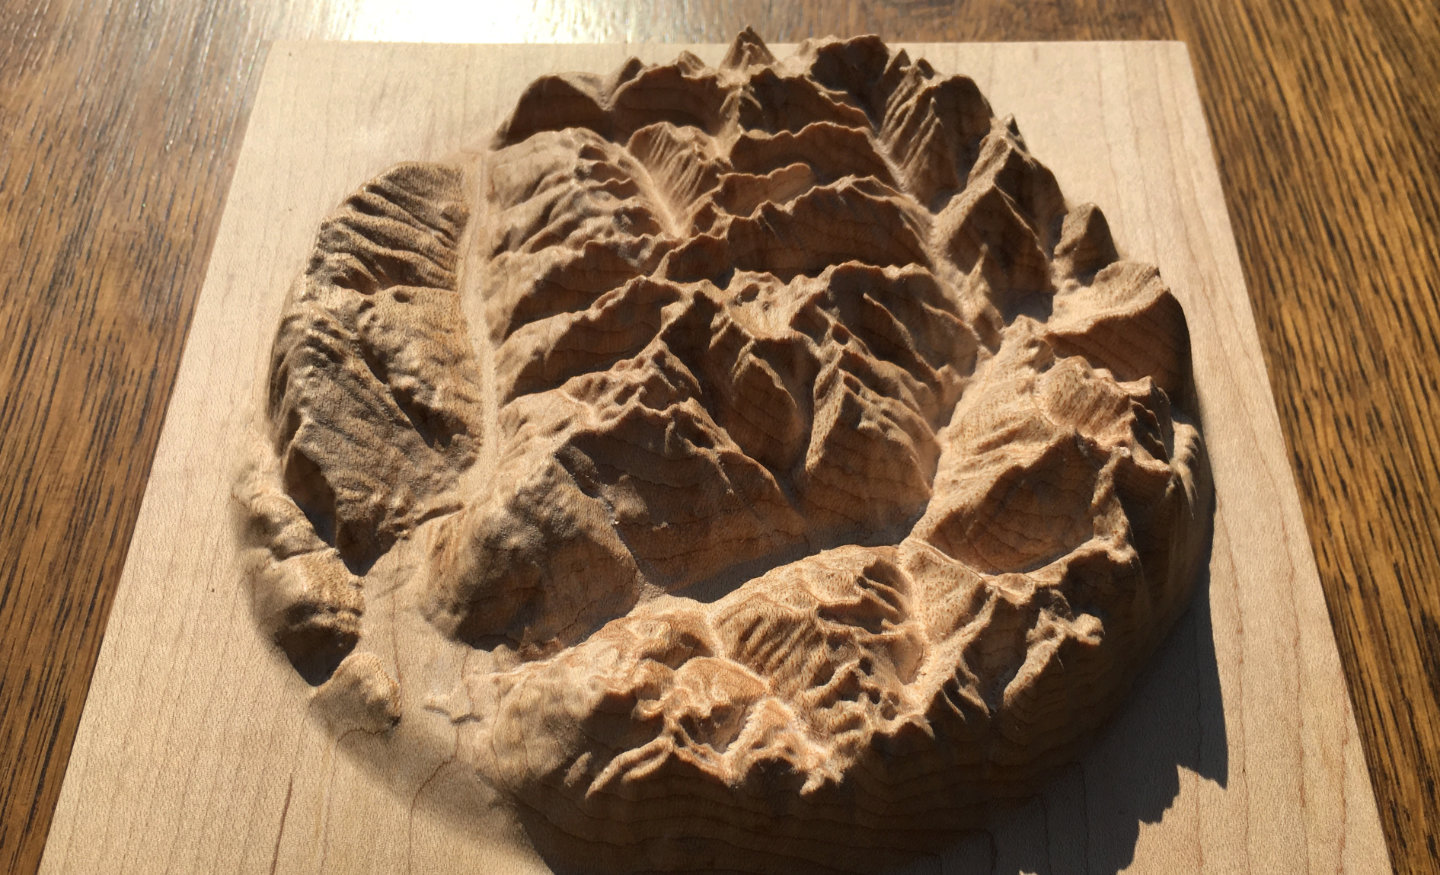 three-dimensional wood-carved relief map of the mountains around Mount Revelstoke in the Selkirk Mountains, British Columbia, Canada